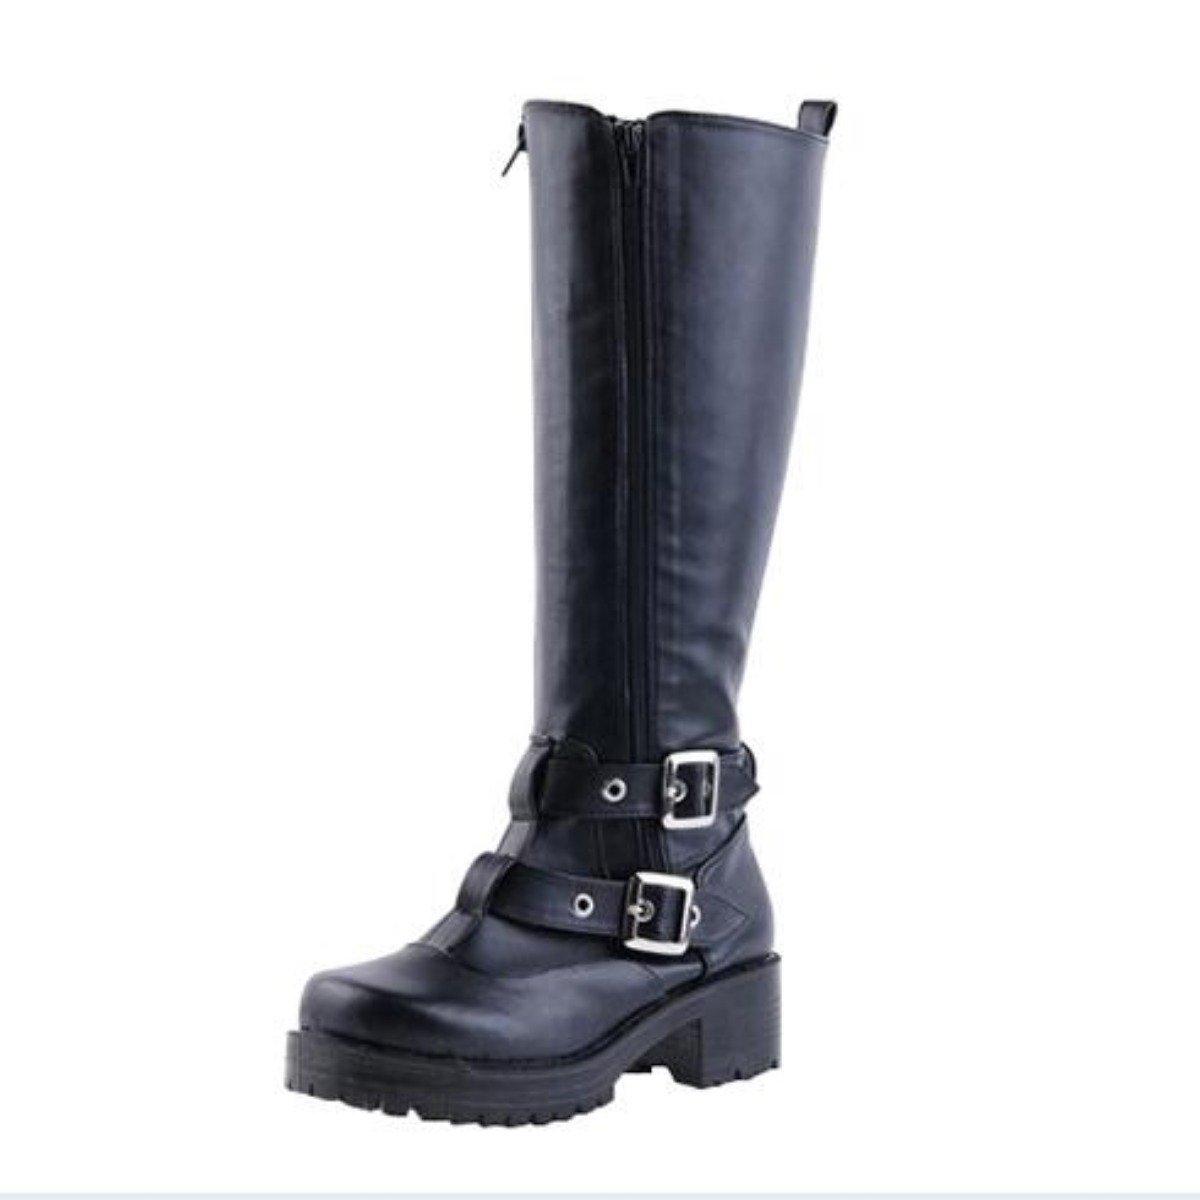 Women's Buckle Straps Riding Boots - American Legend Rider